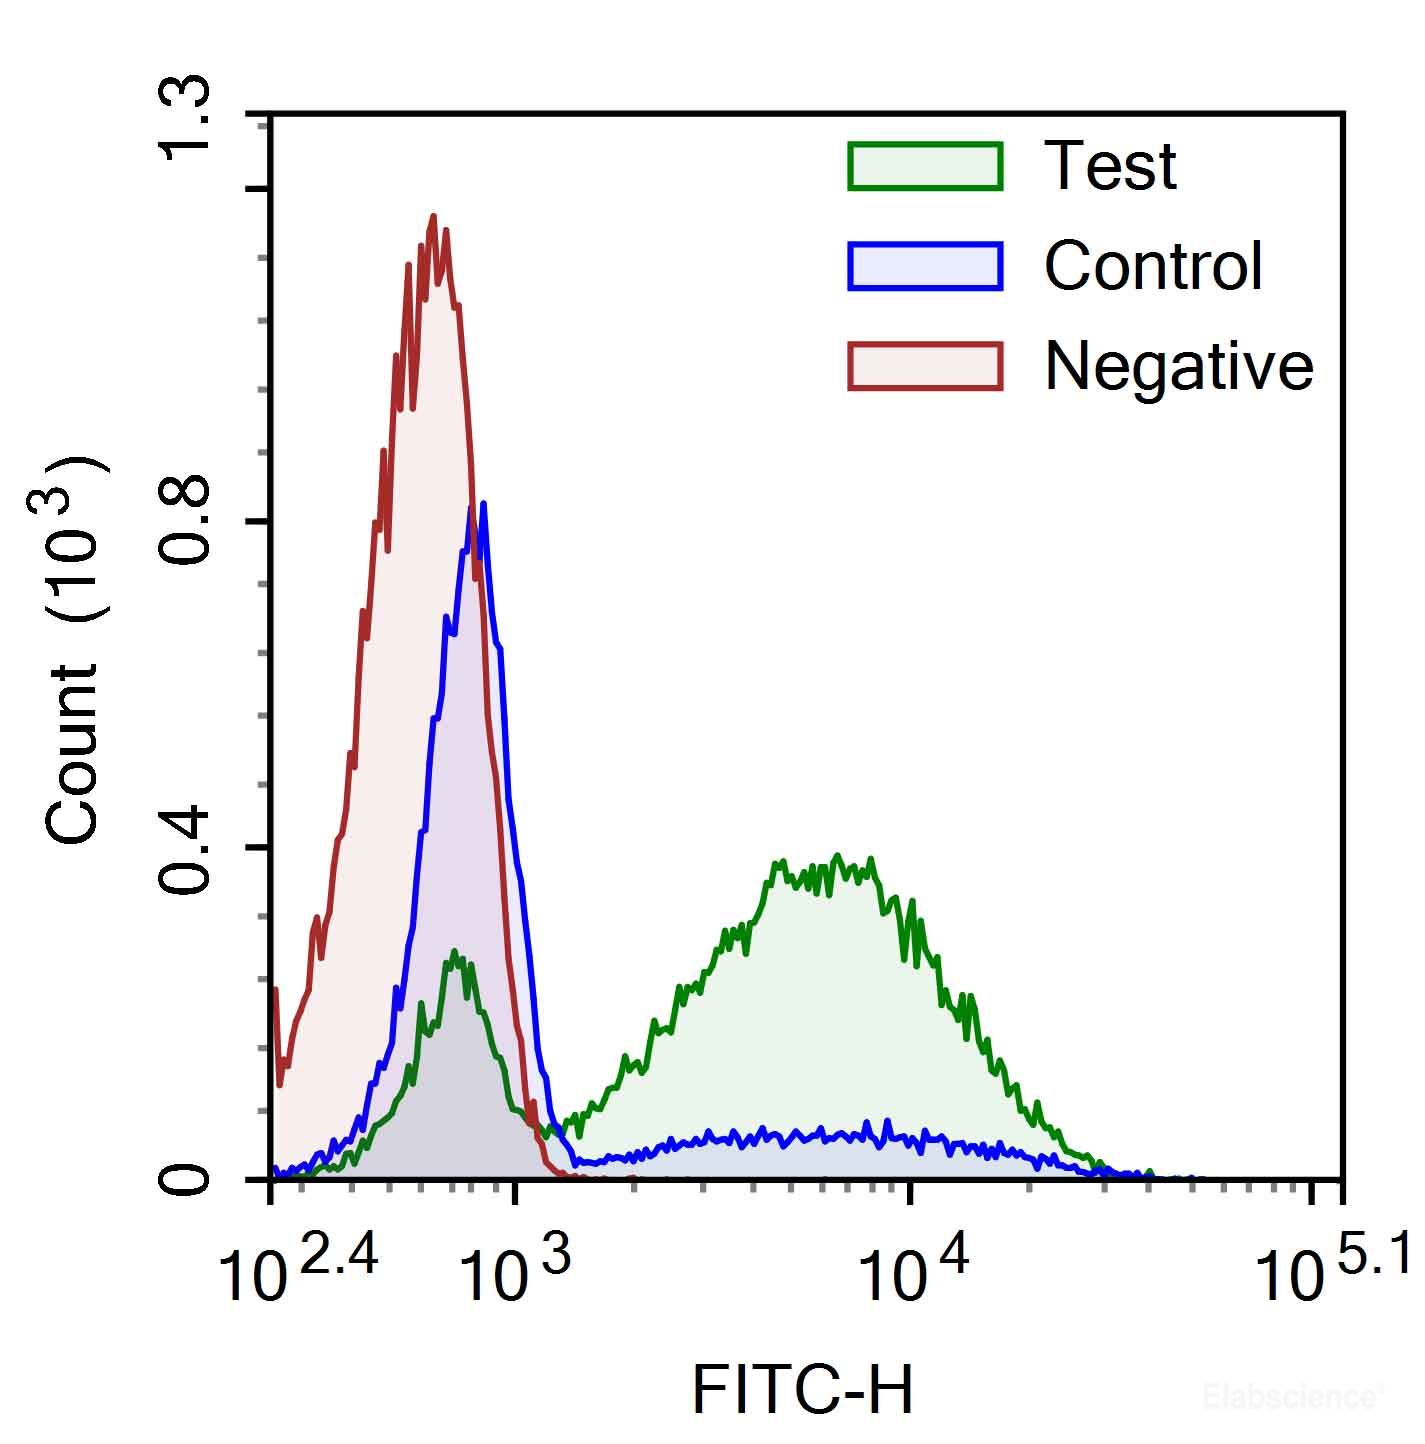 Camptothecin-induced apoptosis in HL-60 cells. Test: HL-60 cells were treated with 2.5 μM Camptothecin for 4h. Control: Normal HL-60 cells were not treated with drugs. Negative: HL-60 cells were treated with 2.5 μM camptothecin for 4h without TdT enzyme.